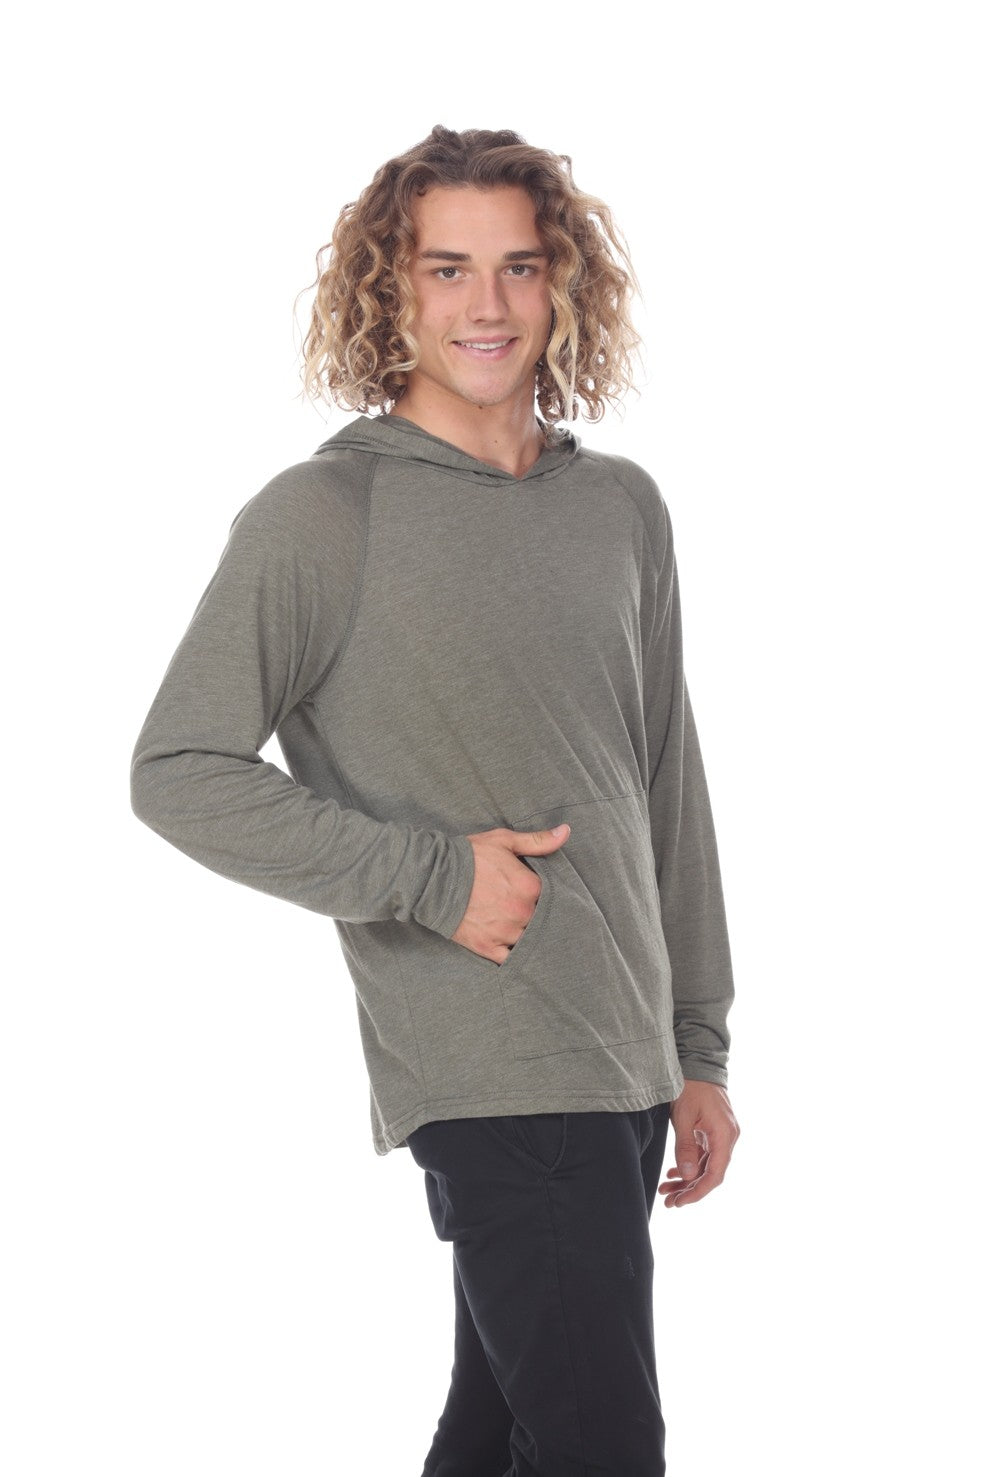 UNISEX Lightweight Pullover Hoodie L/S with Curved Hem